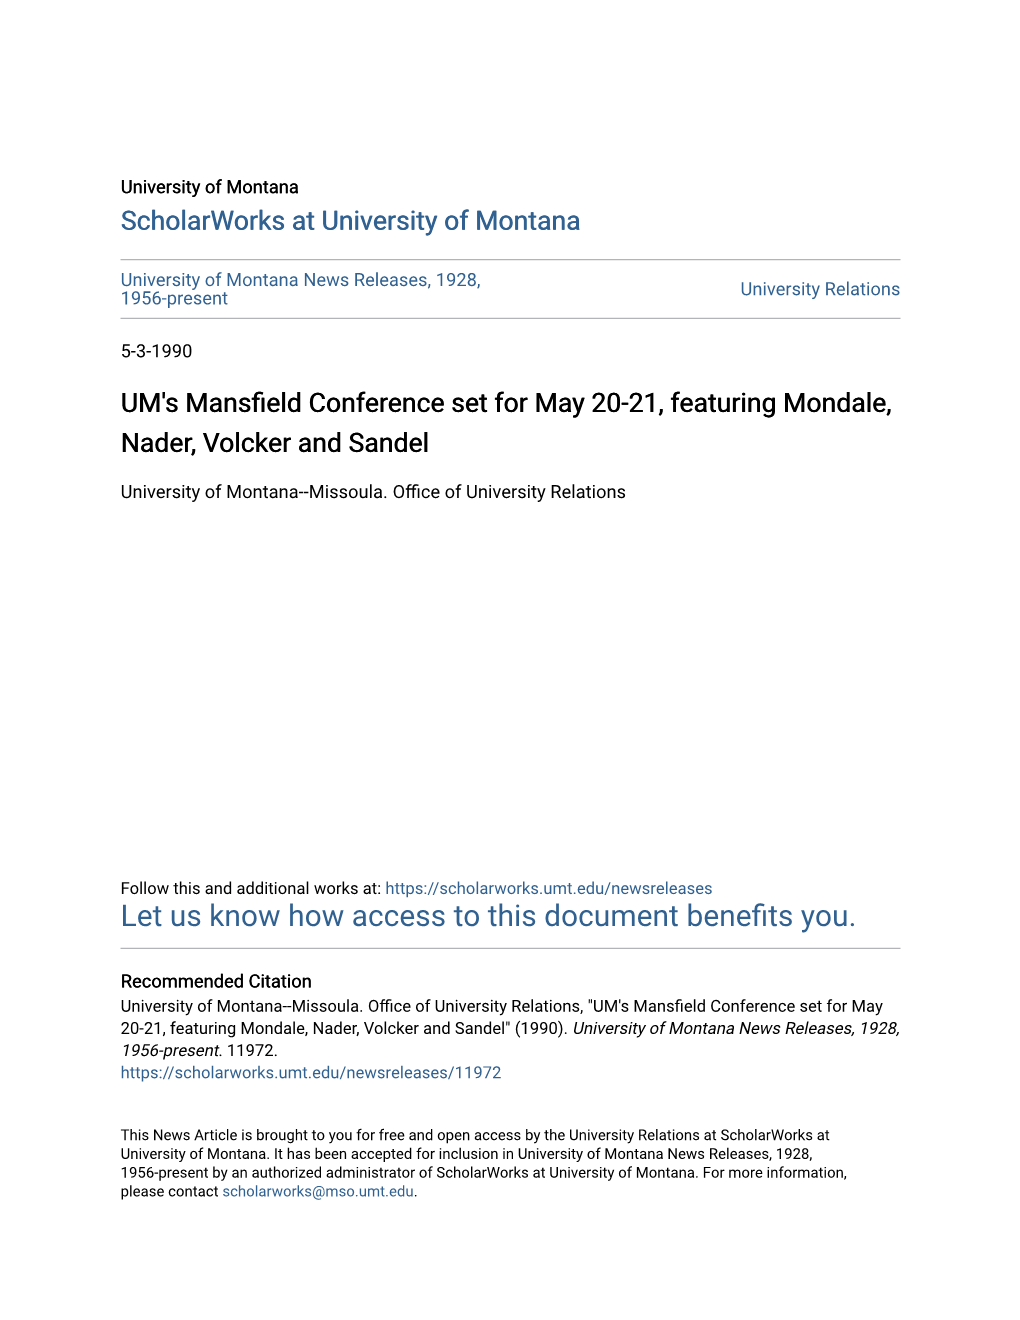 UM's Mansfield Conference Set for May 20-21, Featuring Mondale, Nader, Volcker and Sandel